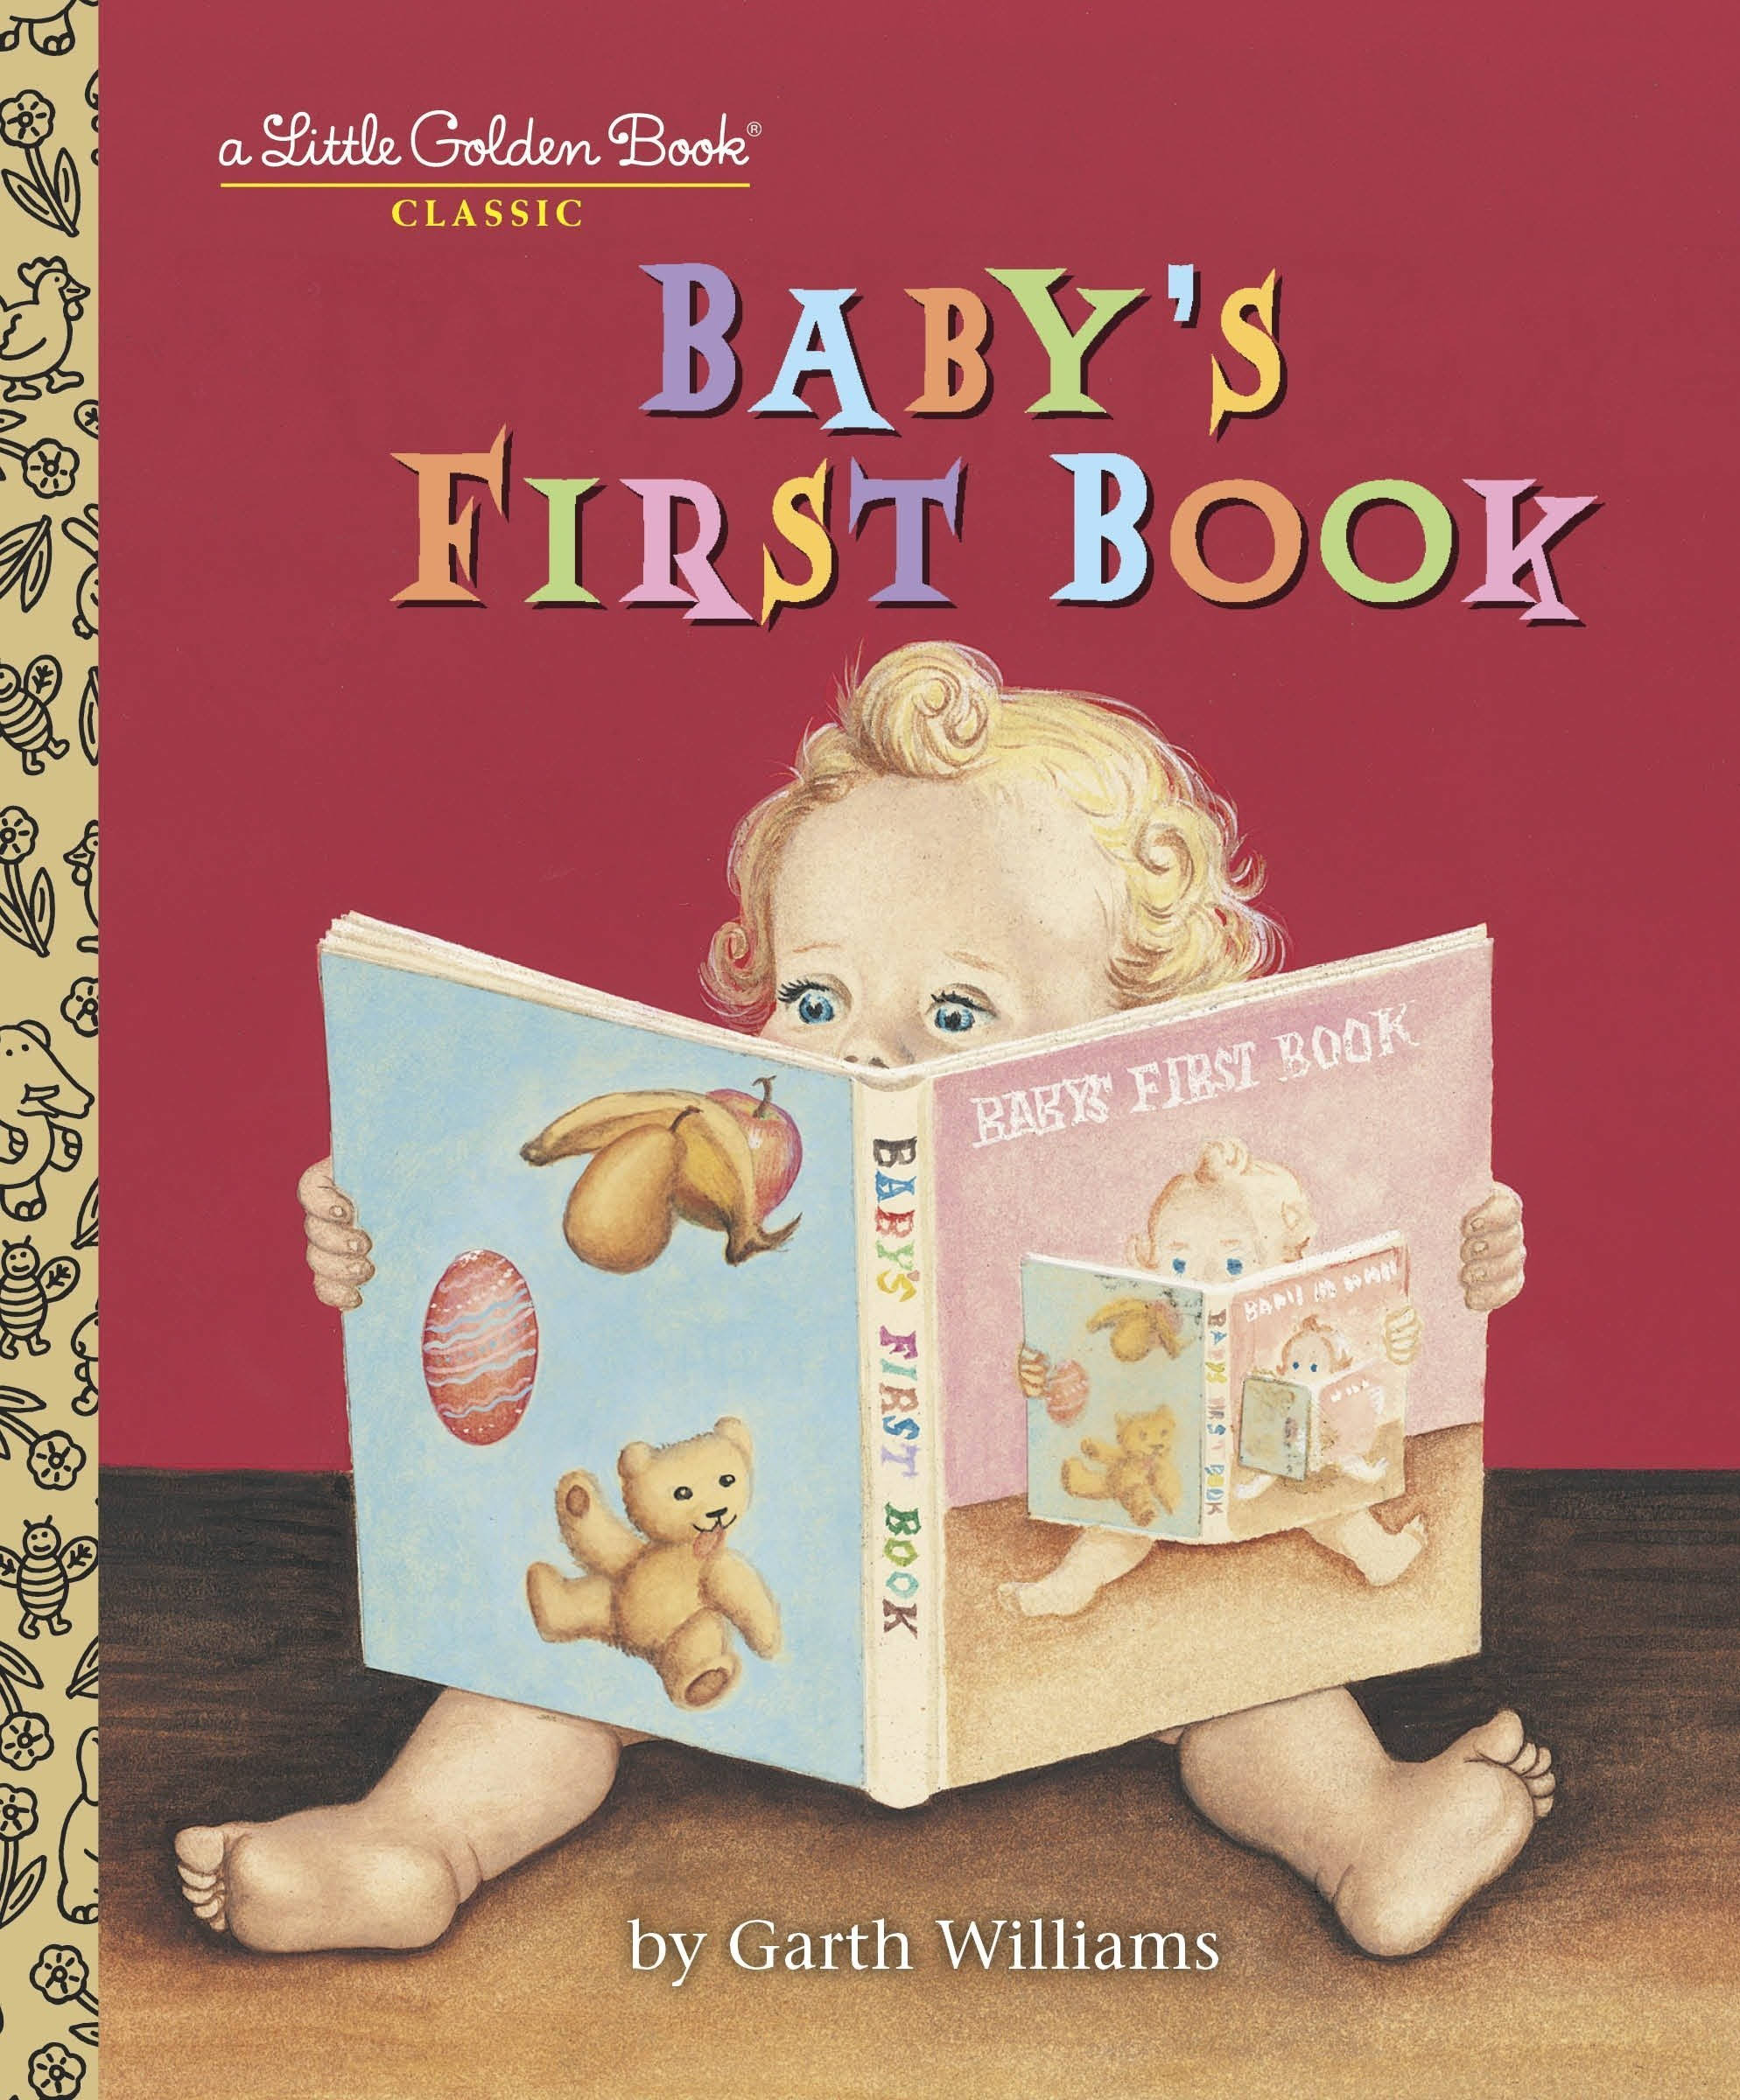 Baby's First Book [Book]